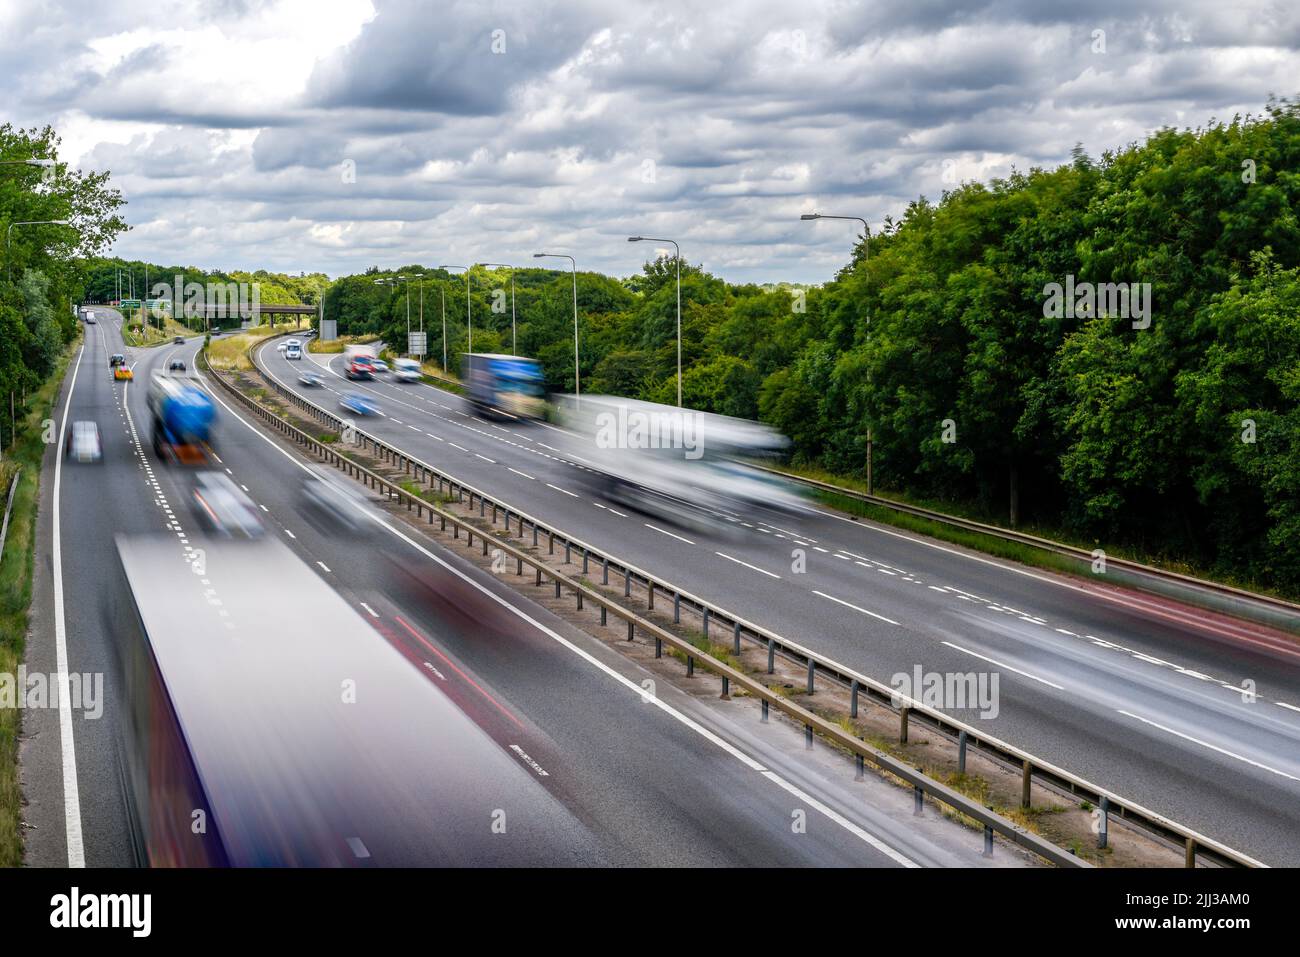 Cars driving on a motorway with motion blur from long exposure Stock Photo